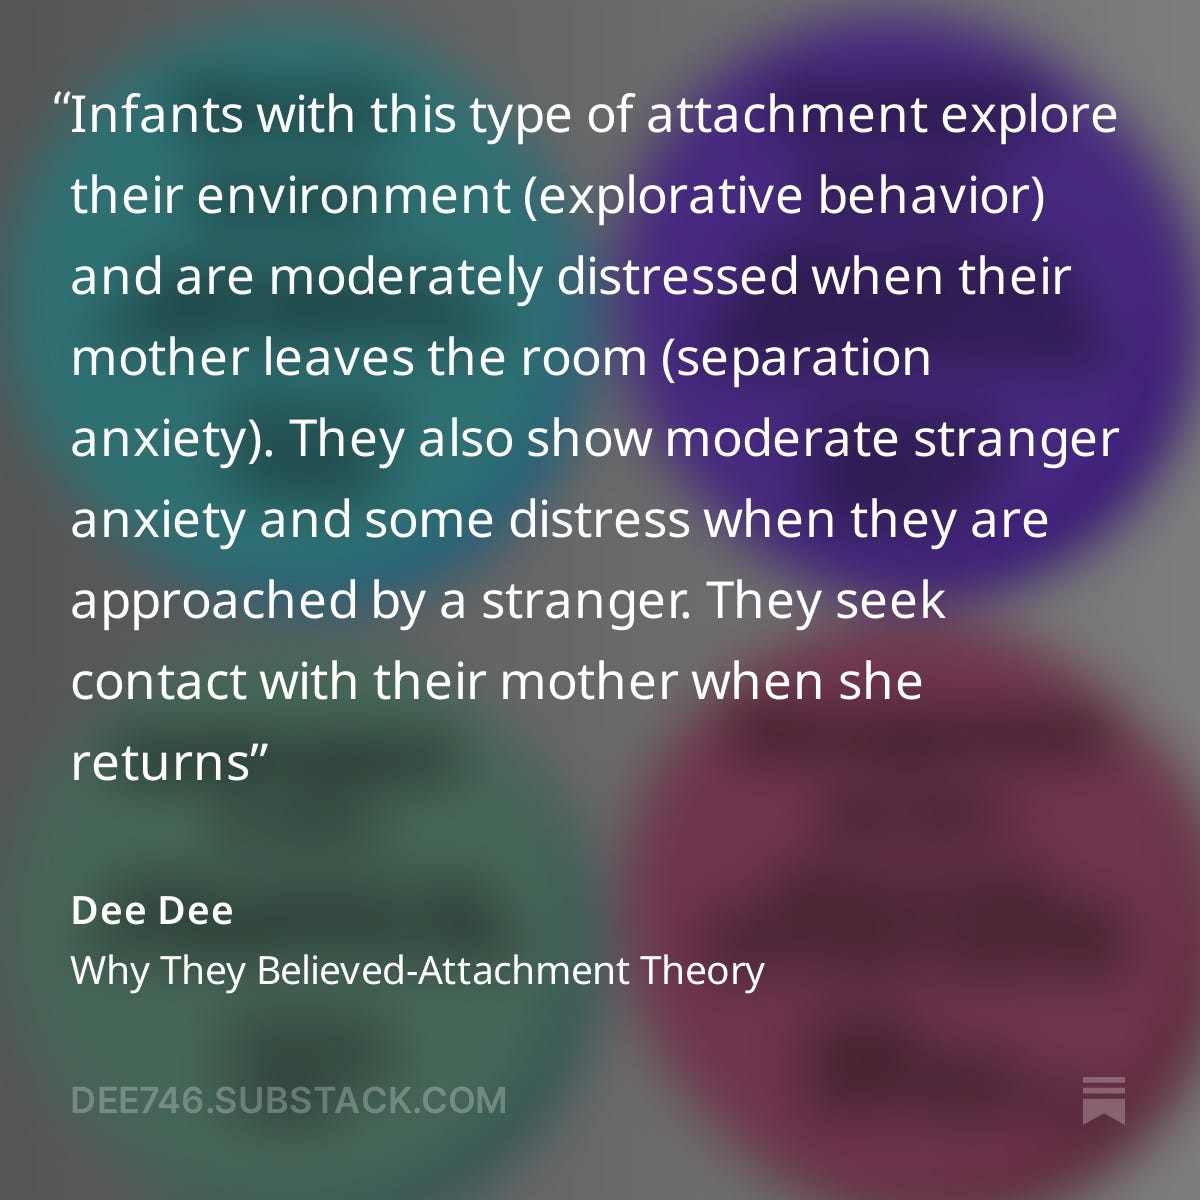 attachment theory discussion excerpt click for full text